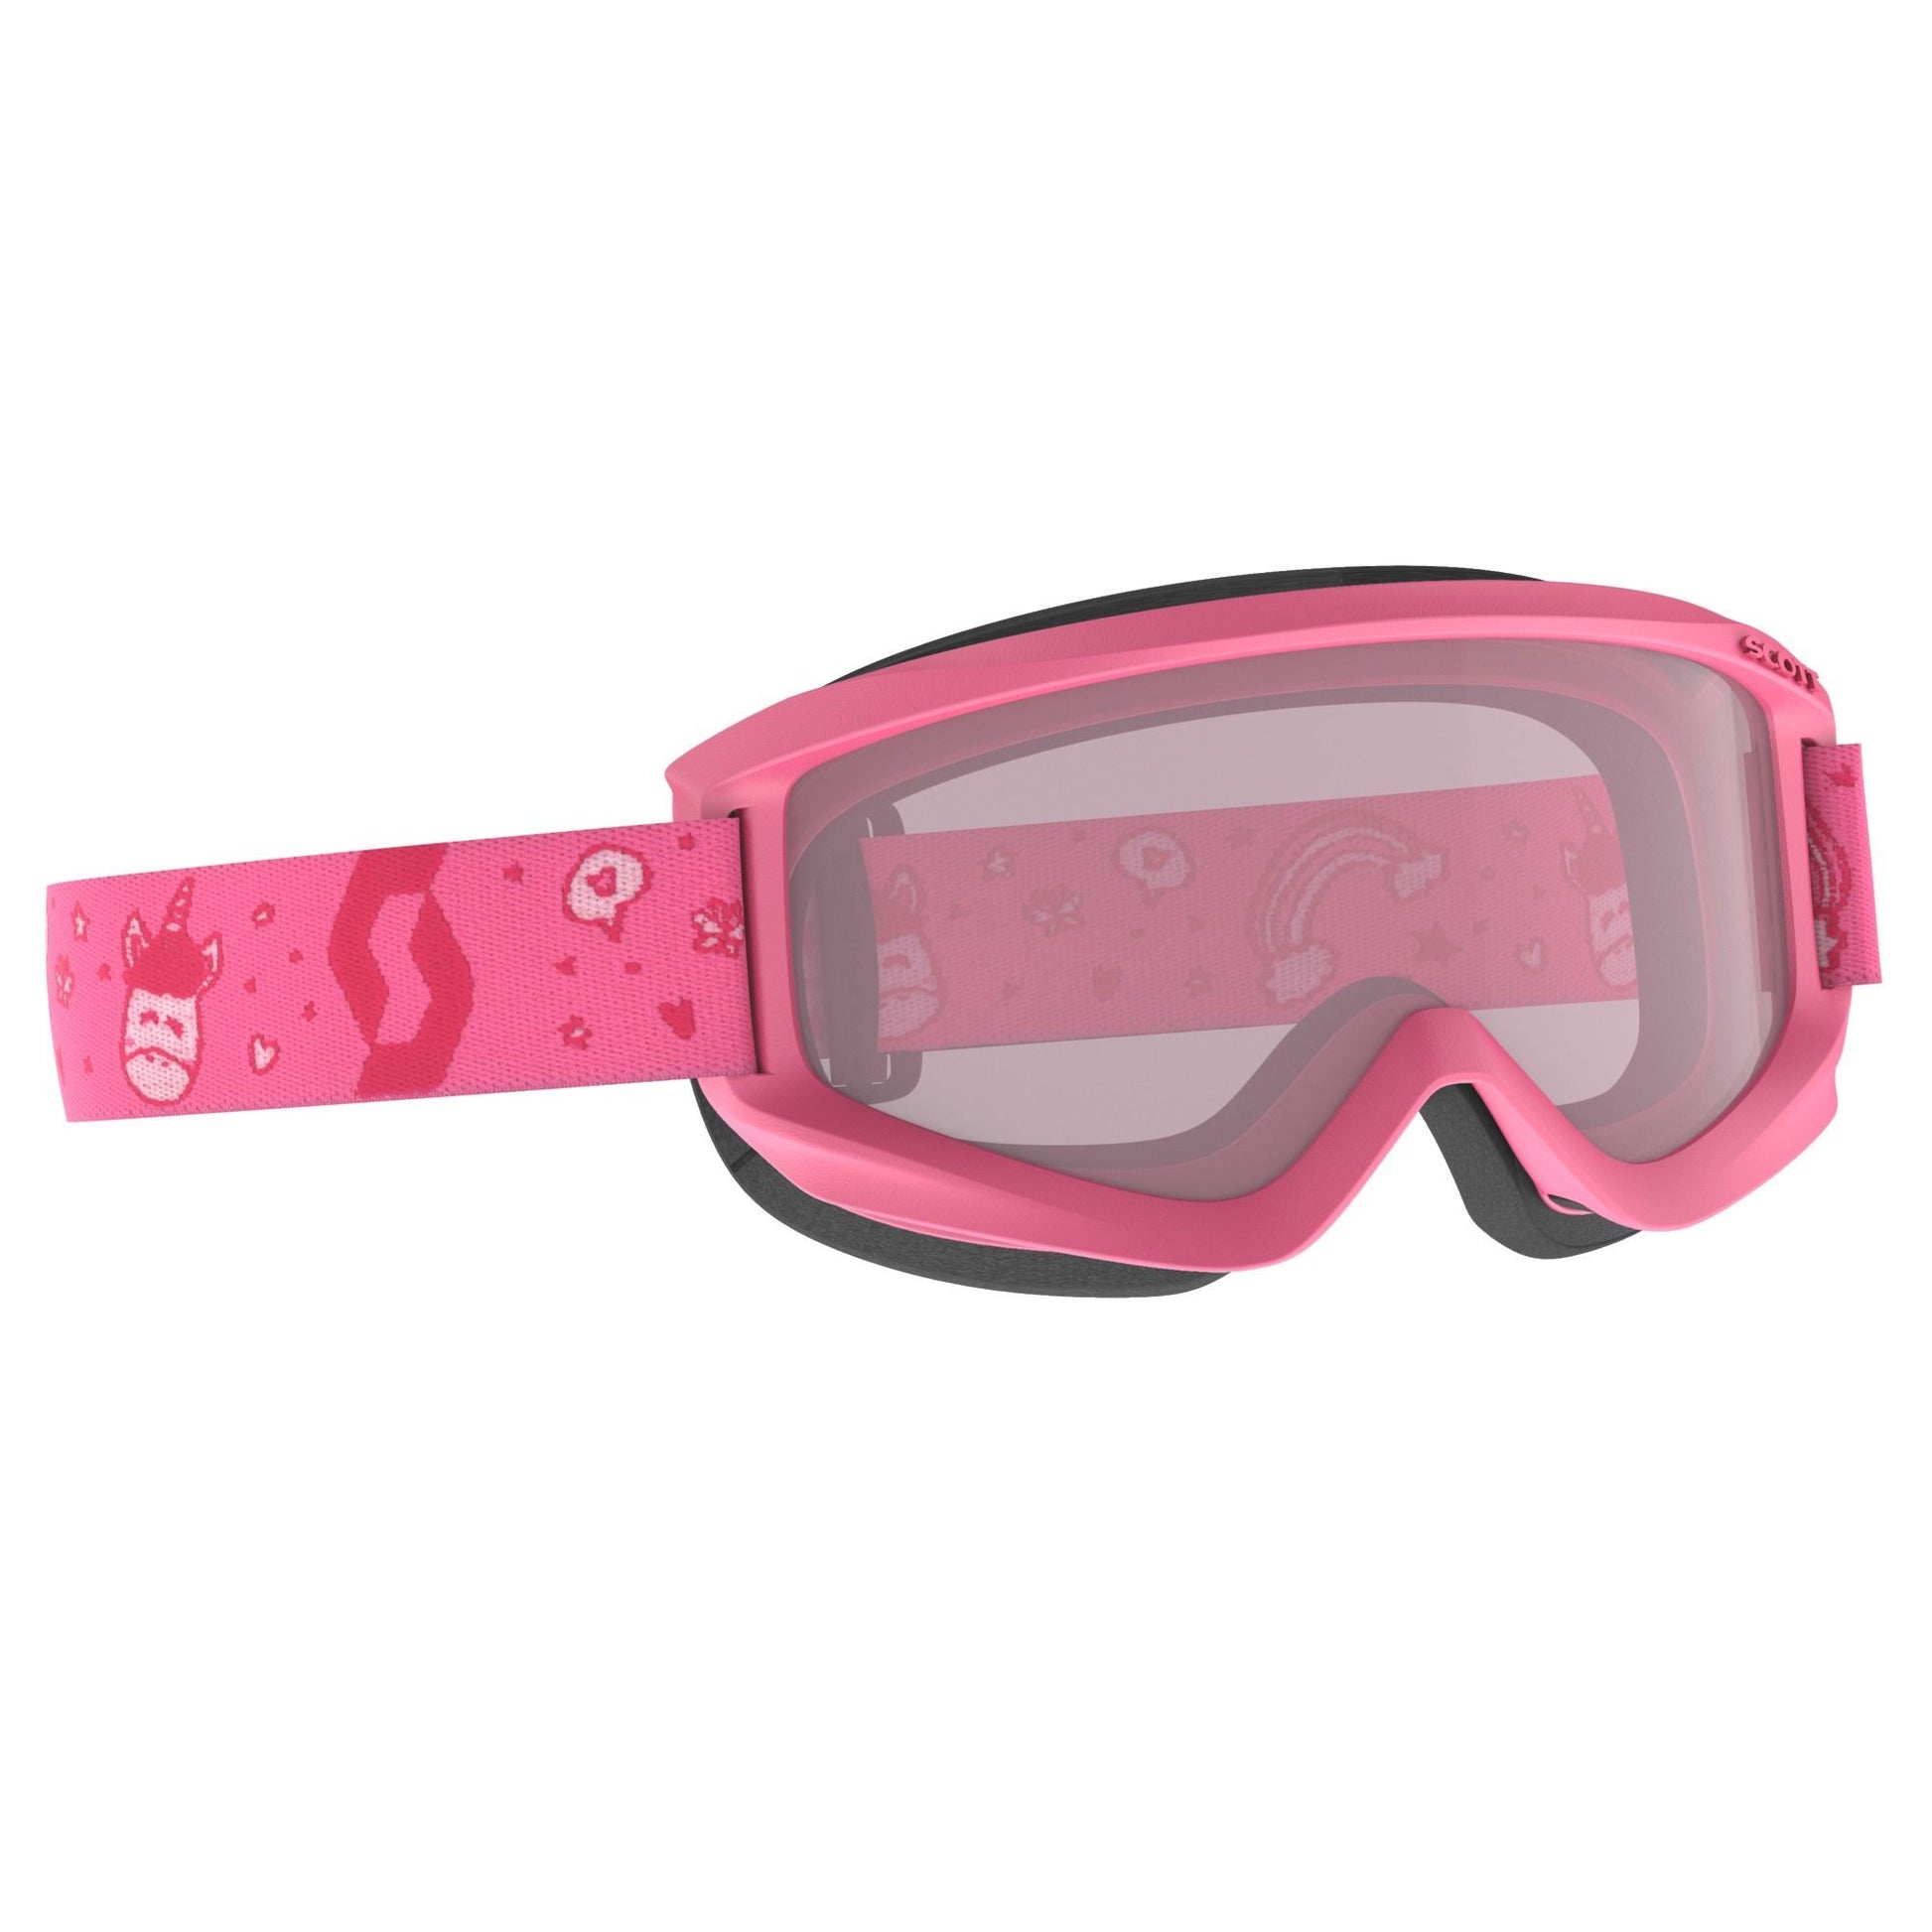 Scott Youth Jr Agent Snow Goggle Pink White Enhancer Snow Goggles